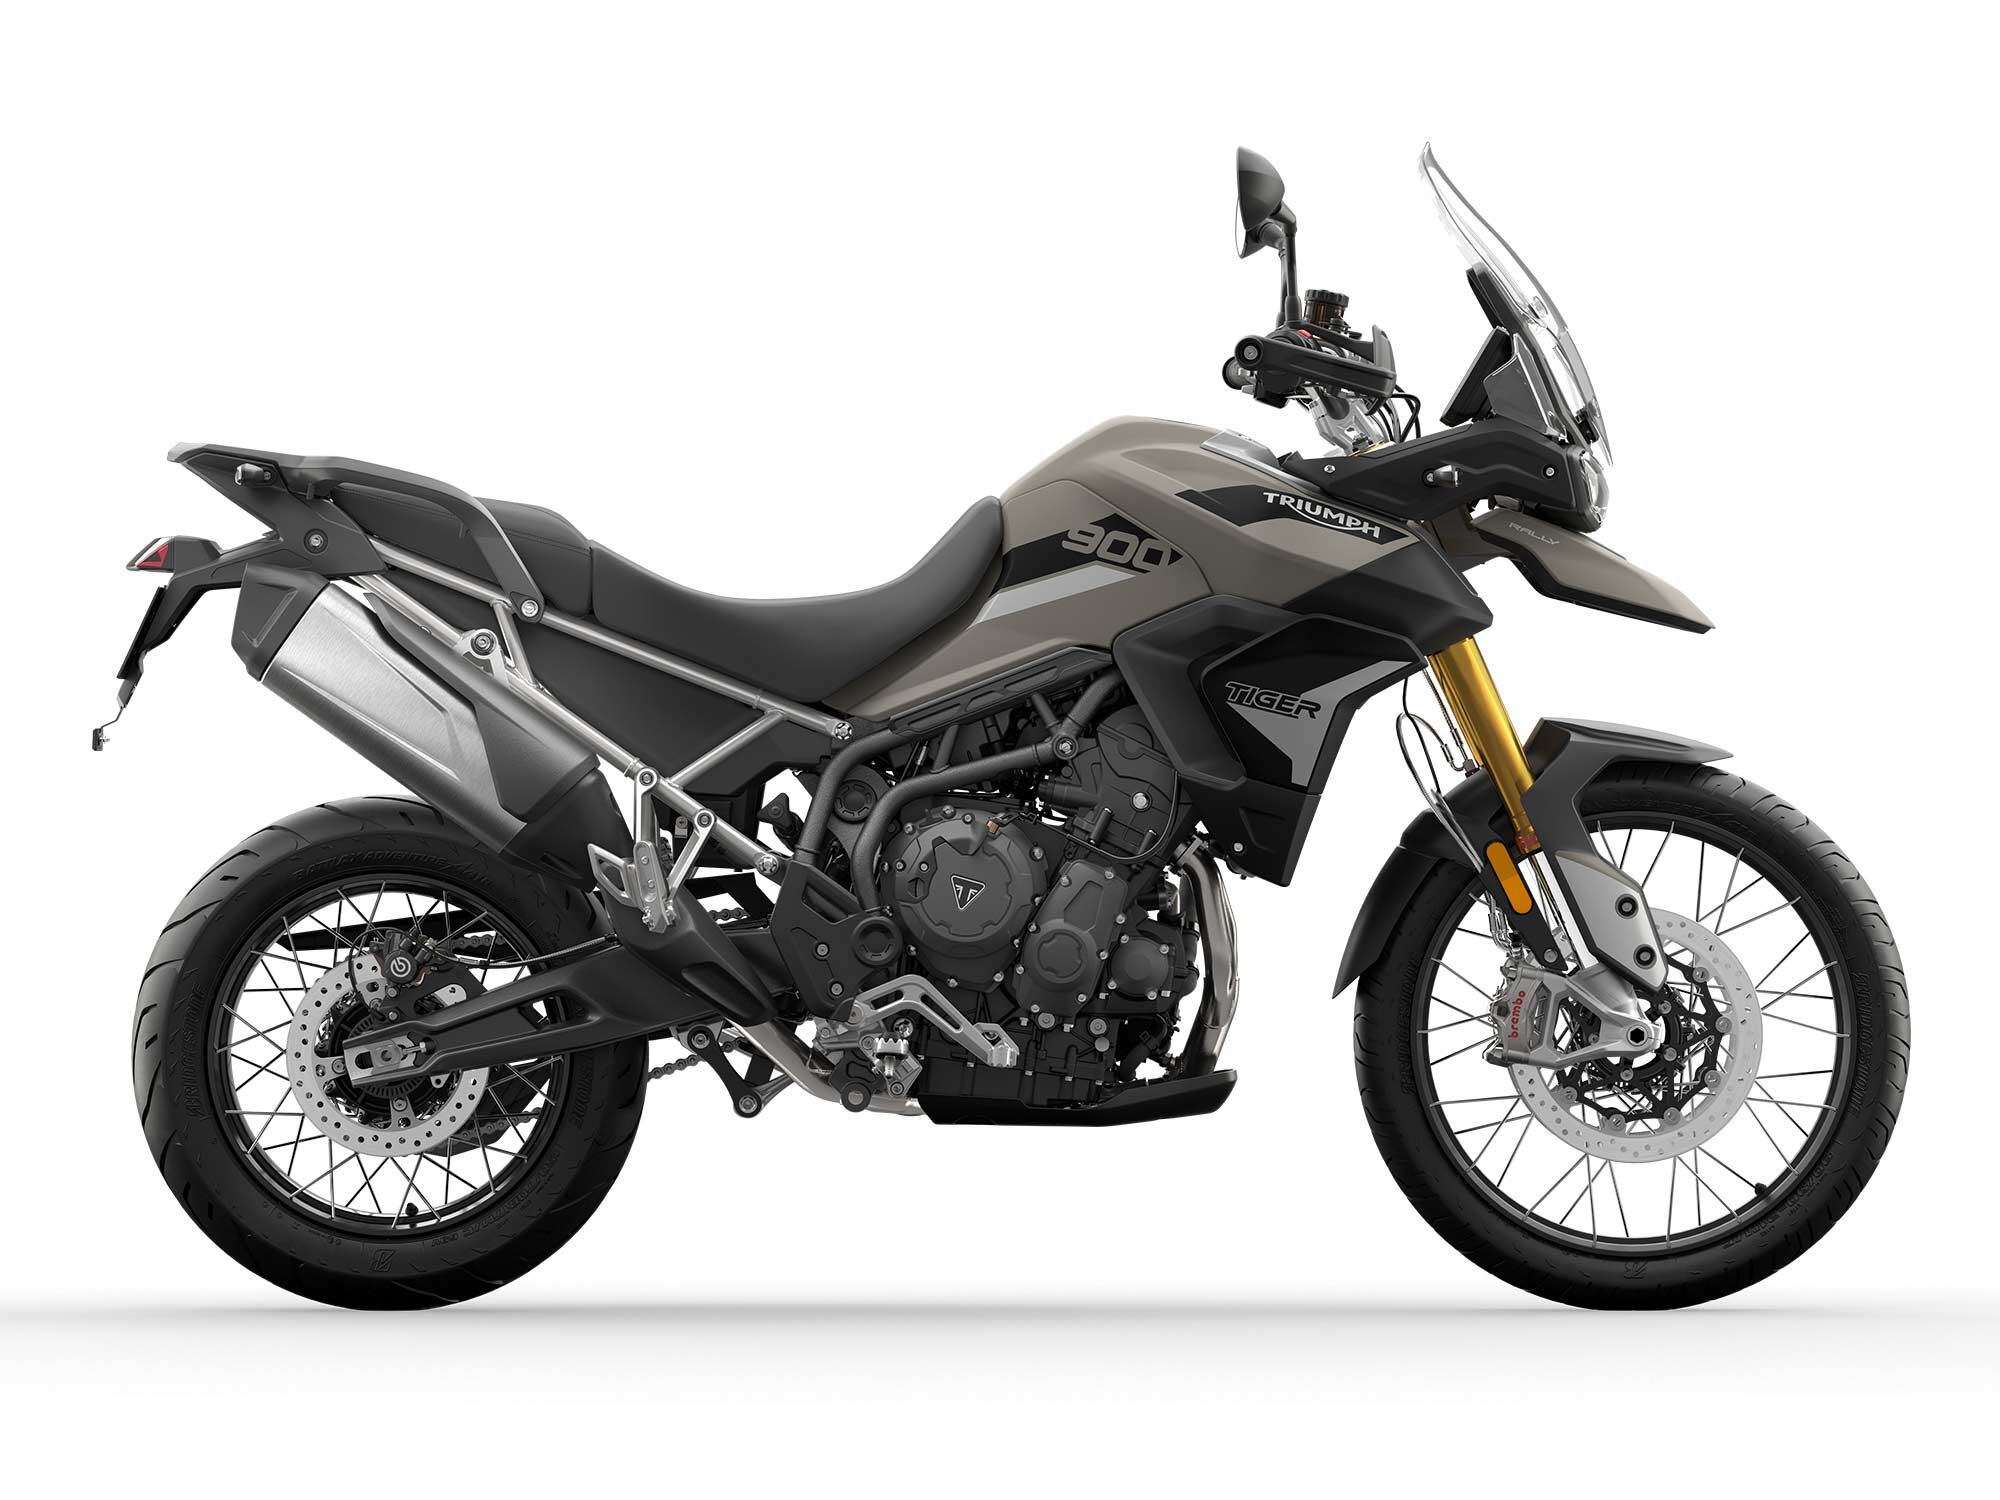 Tiger 900 Rally and Rally Pro – Sandstorm and Matte Jet Black